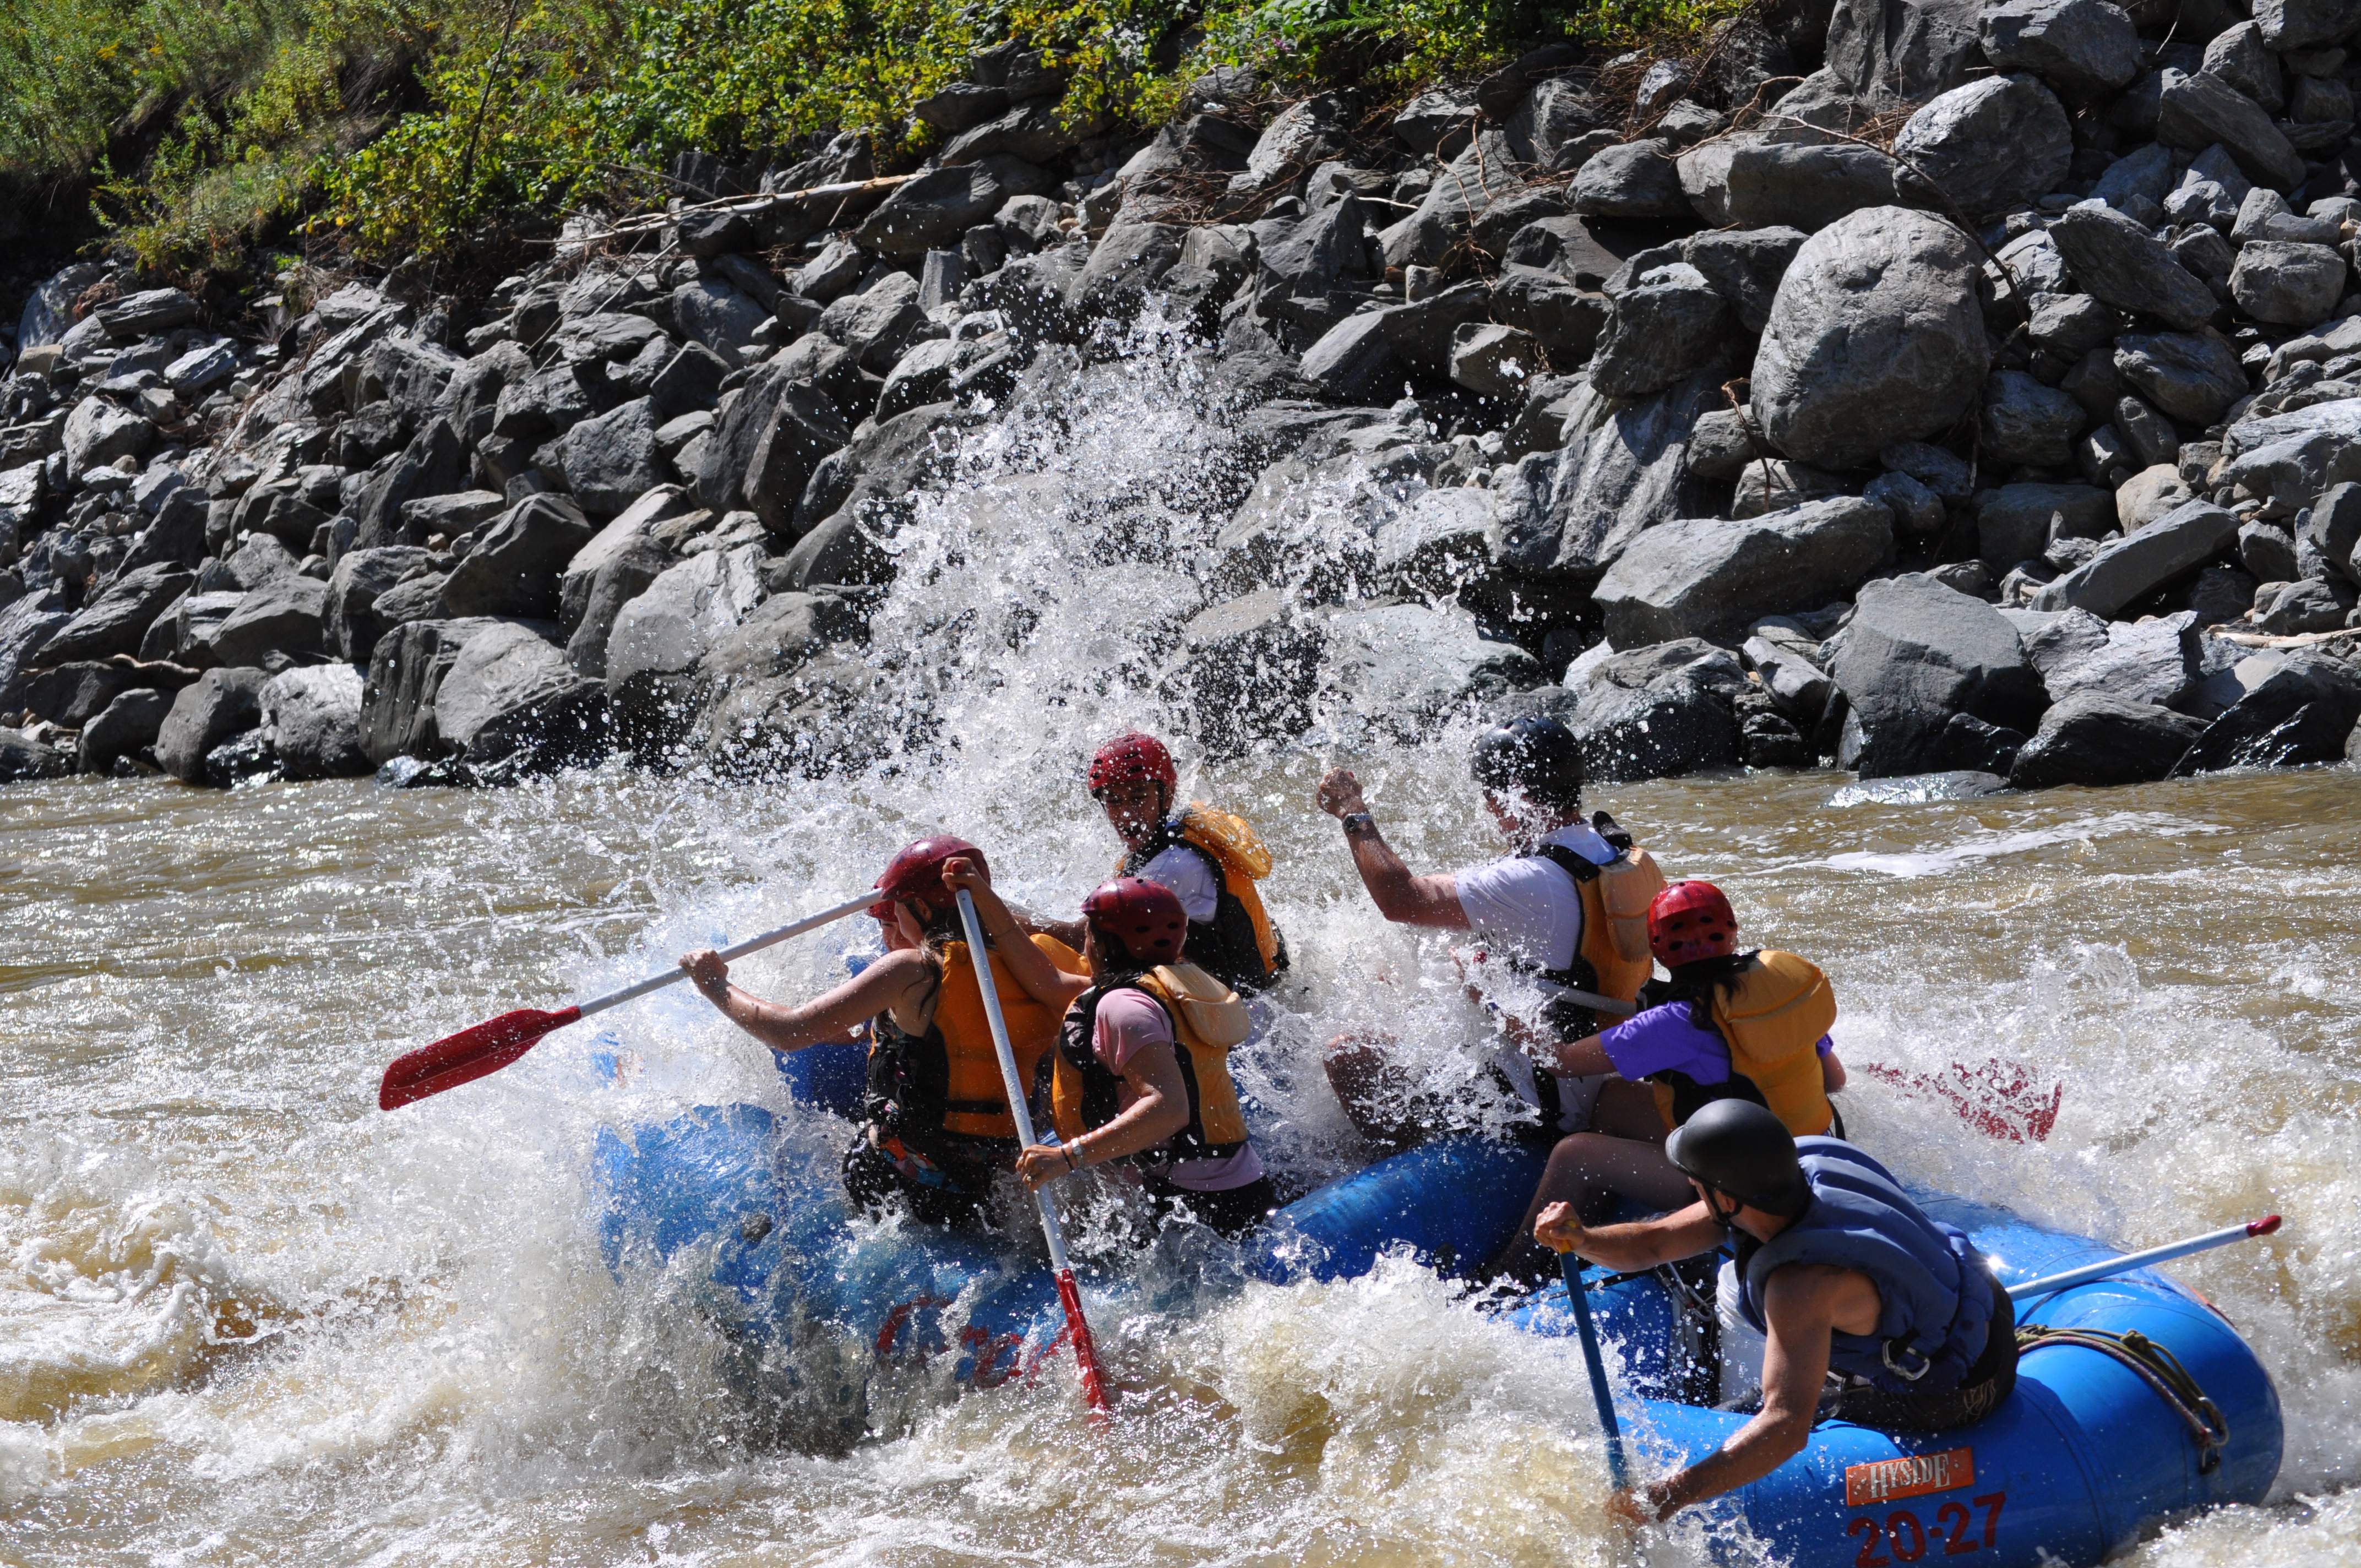 group of rafters going downhill and getting splashed by water